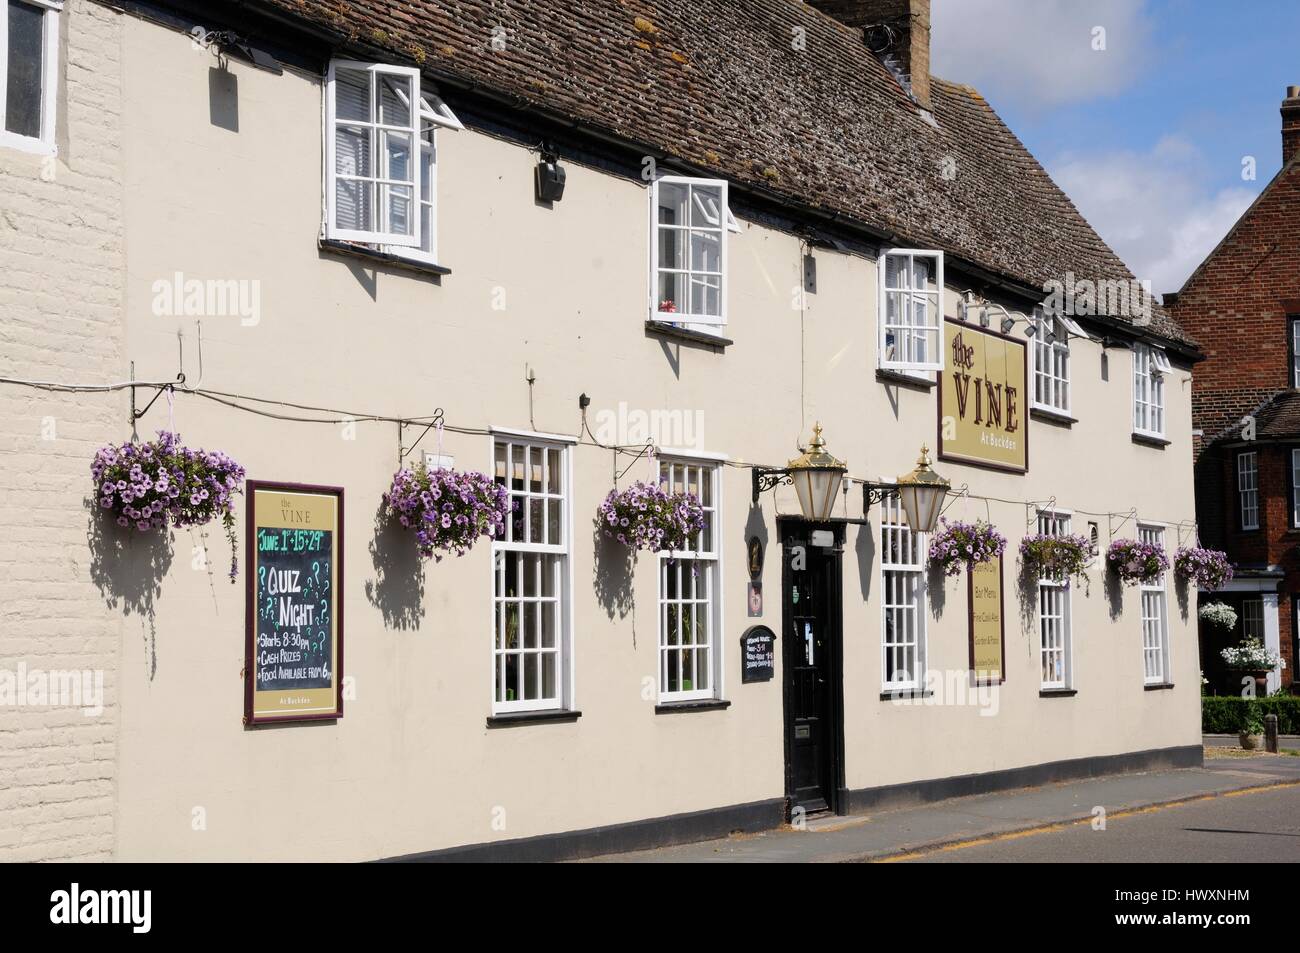 The Vine, Buckden, Cambridgeshire, is the only remaining traditional pub in the village. It once had its own brewery. Stock Photo